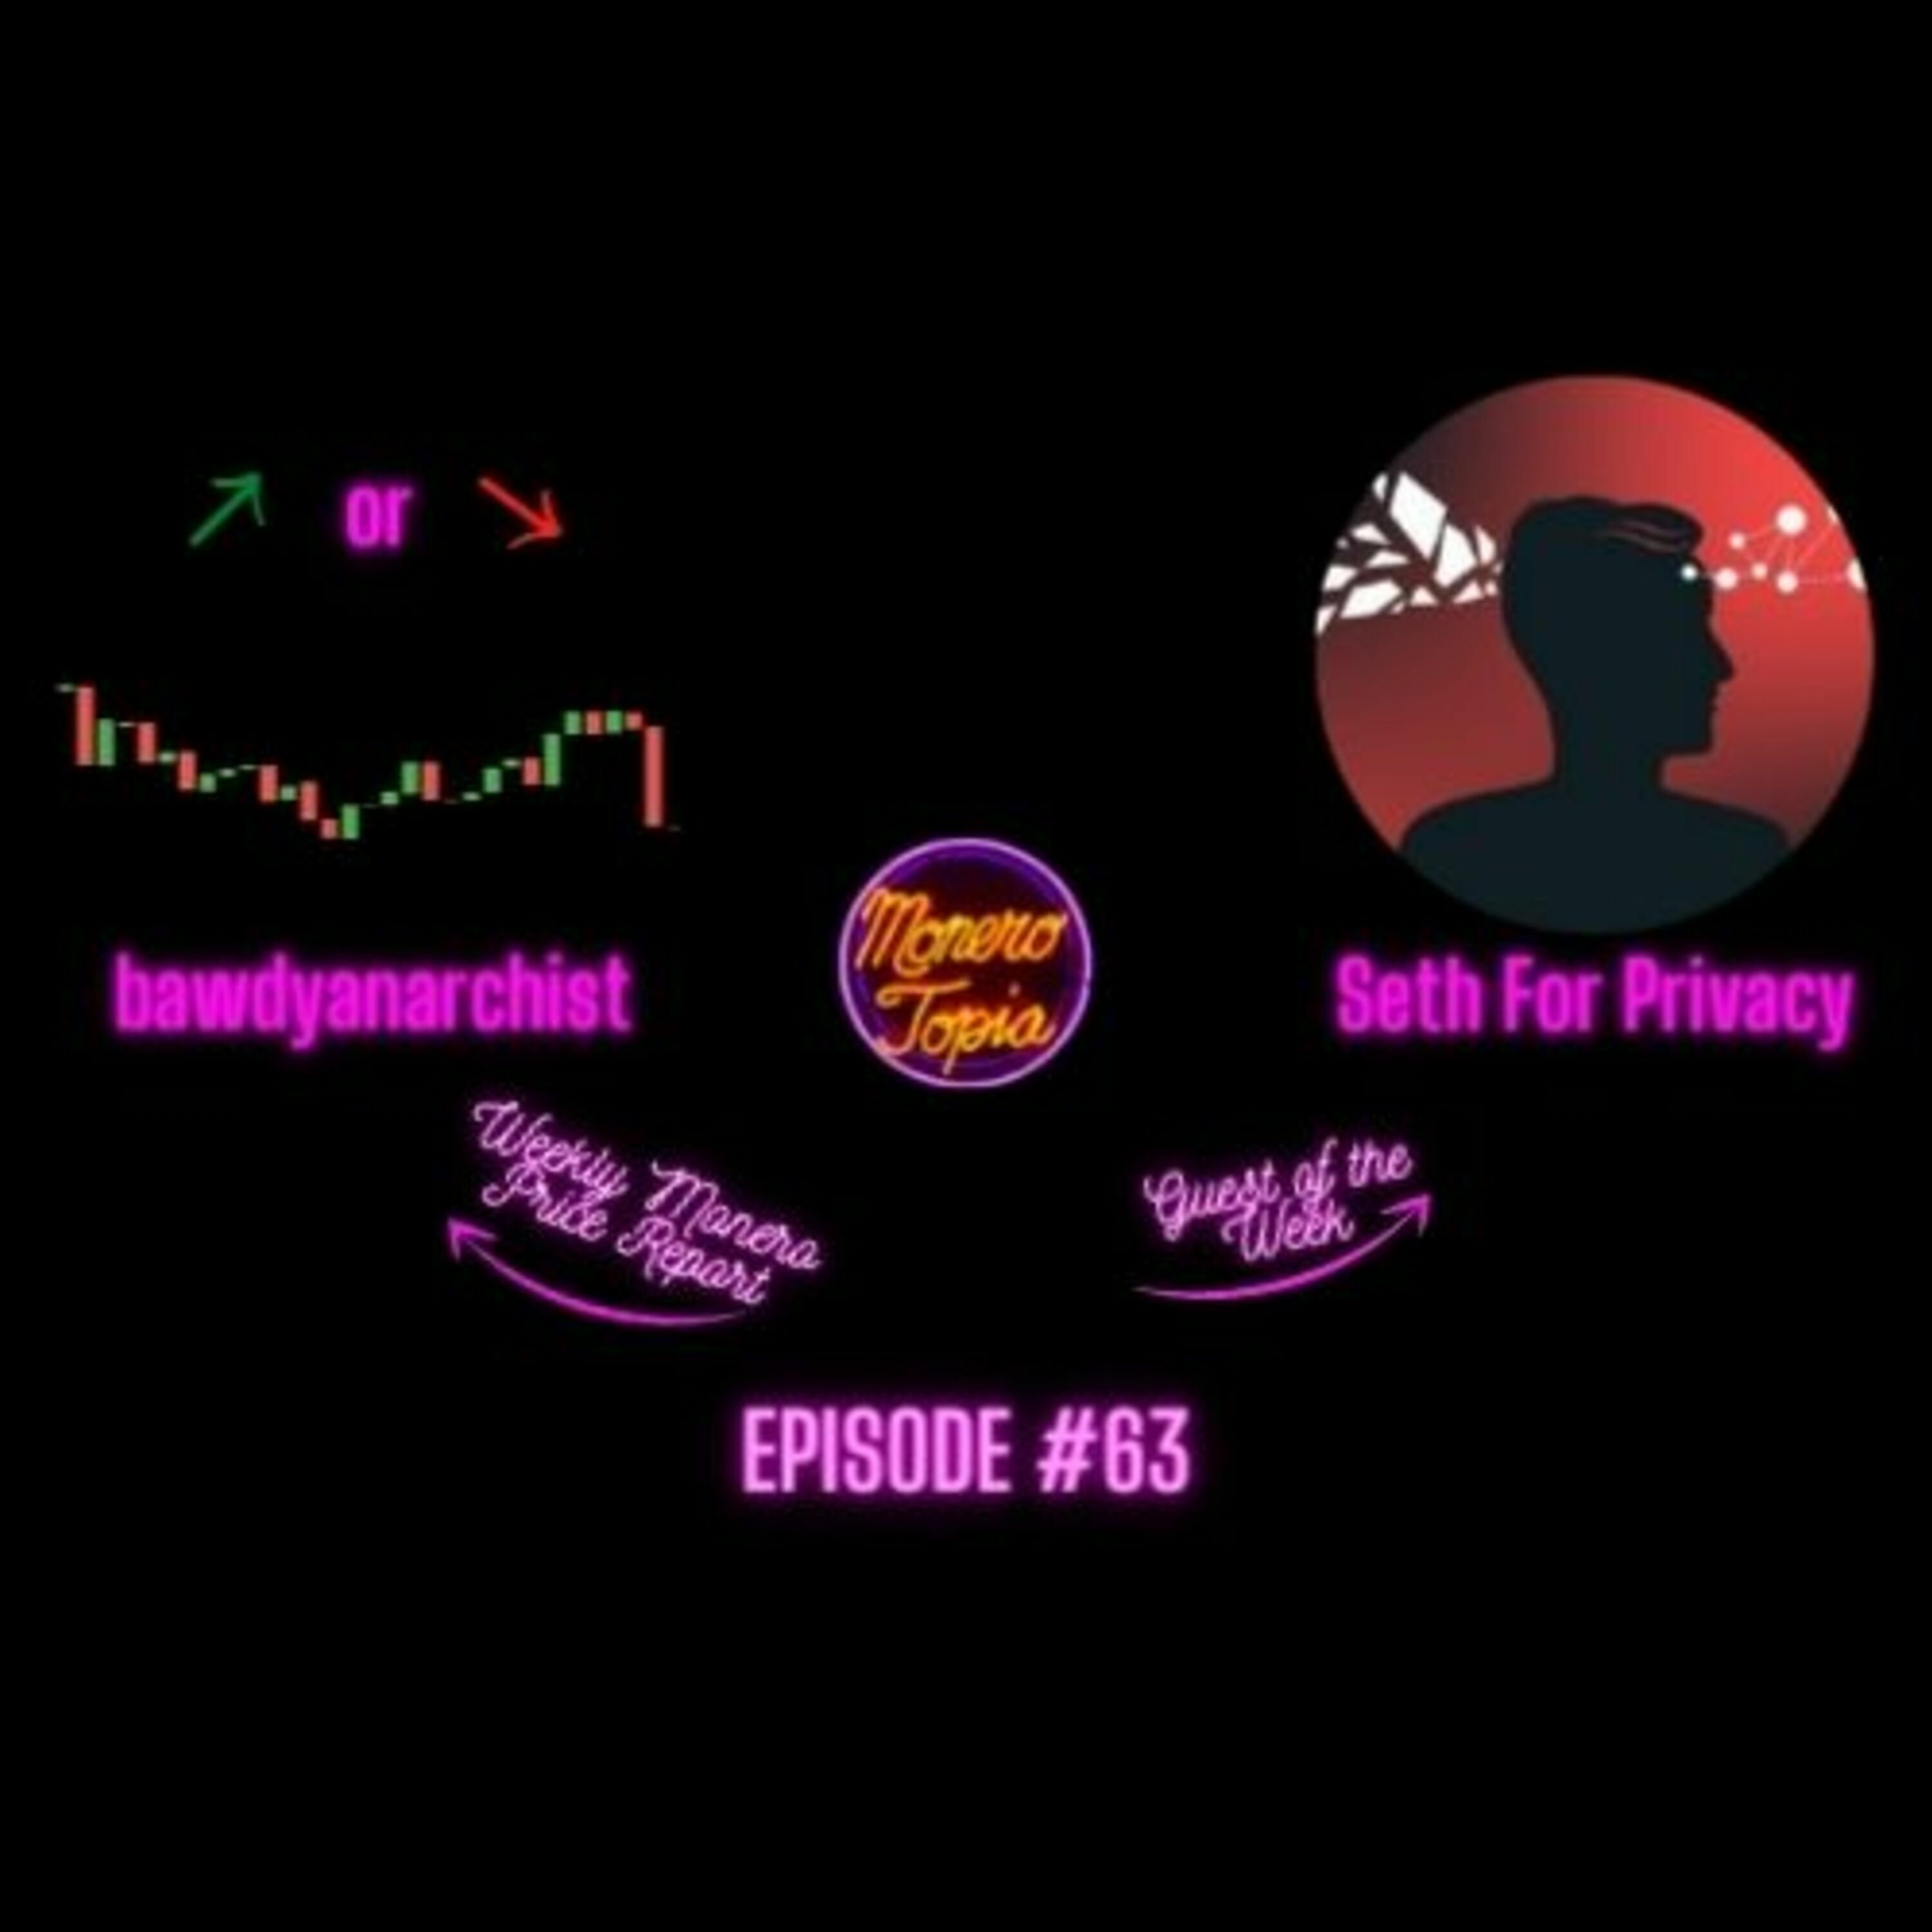 Price Report with Bawdyanarchist, special guest Seth for privacy & much more! Epi#63